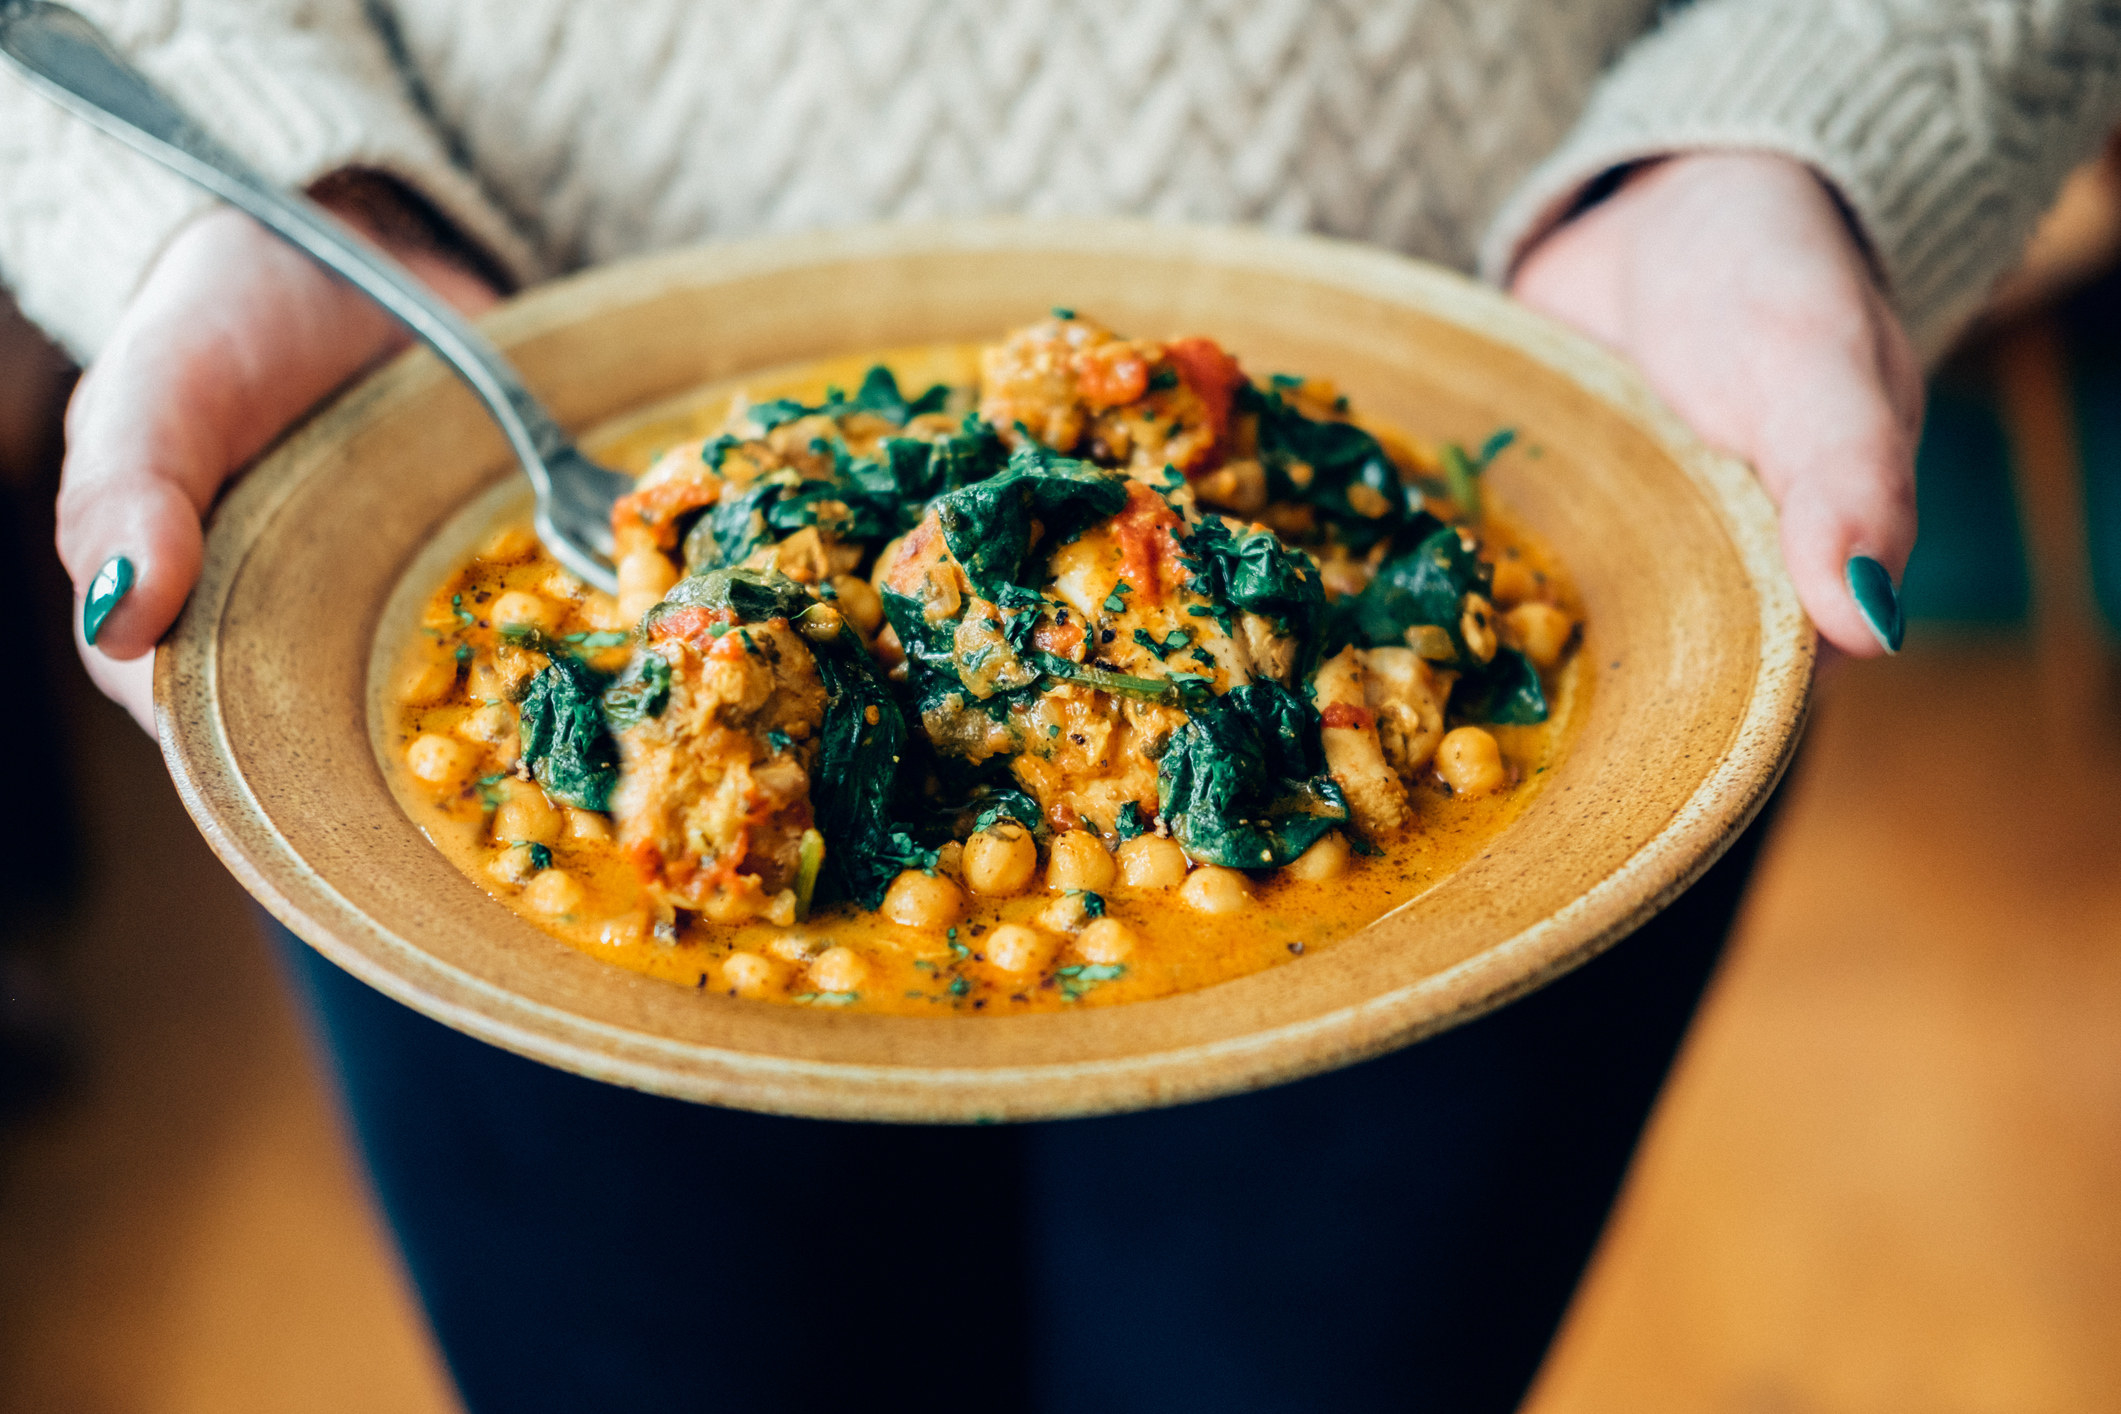 A bowl of chickpea and spinach curry.